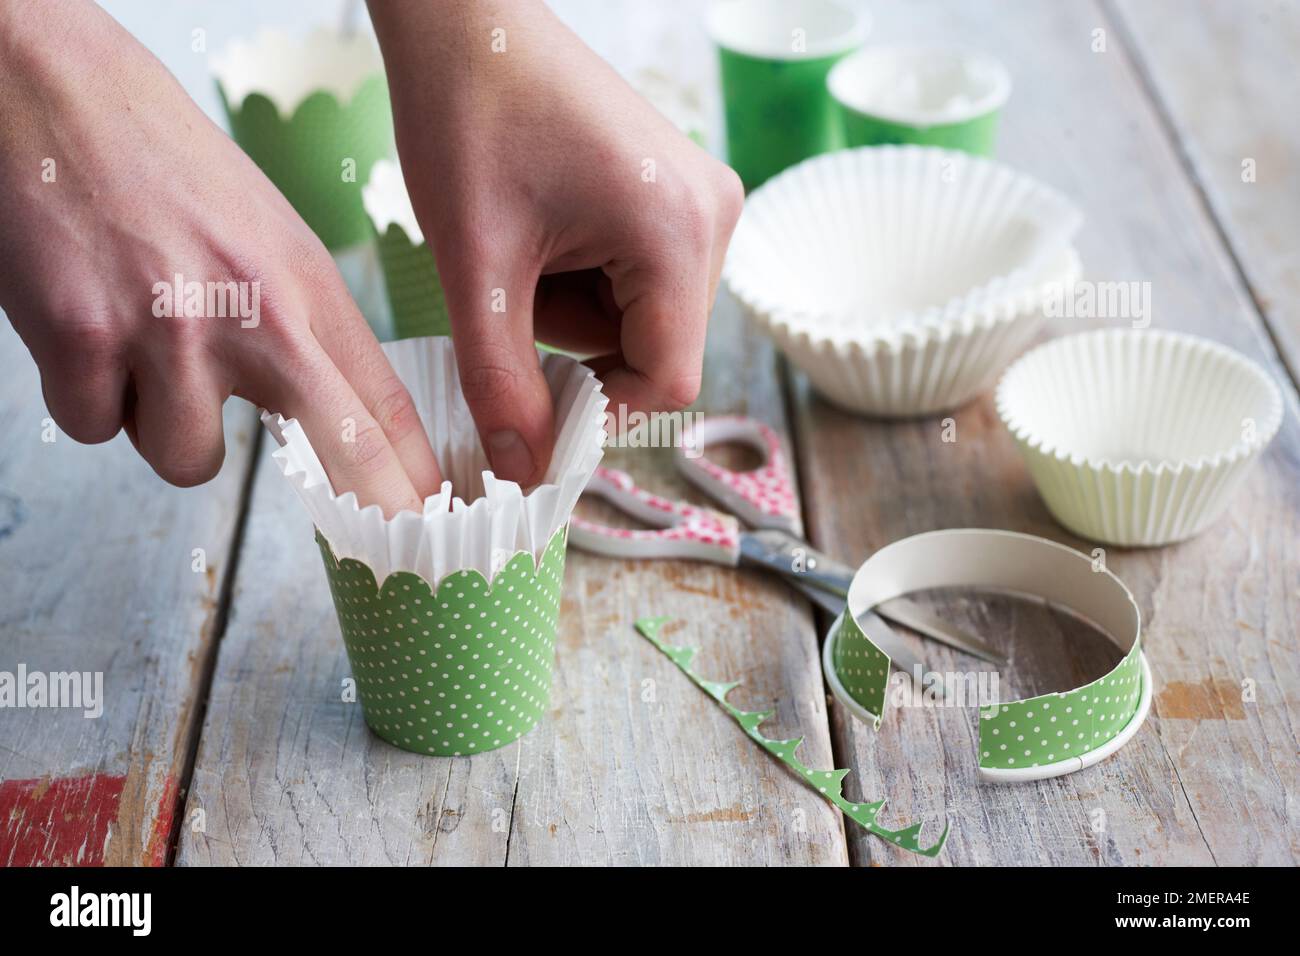 Putting cupcake cases into espresso cups, making flowerpot cakes Stock Photo